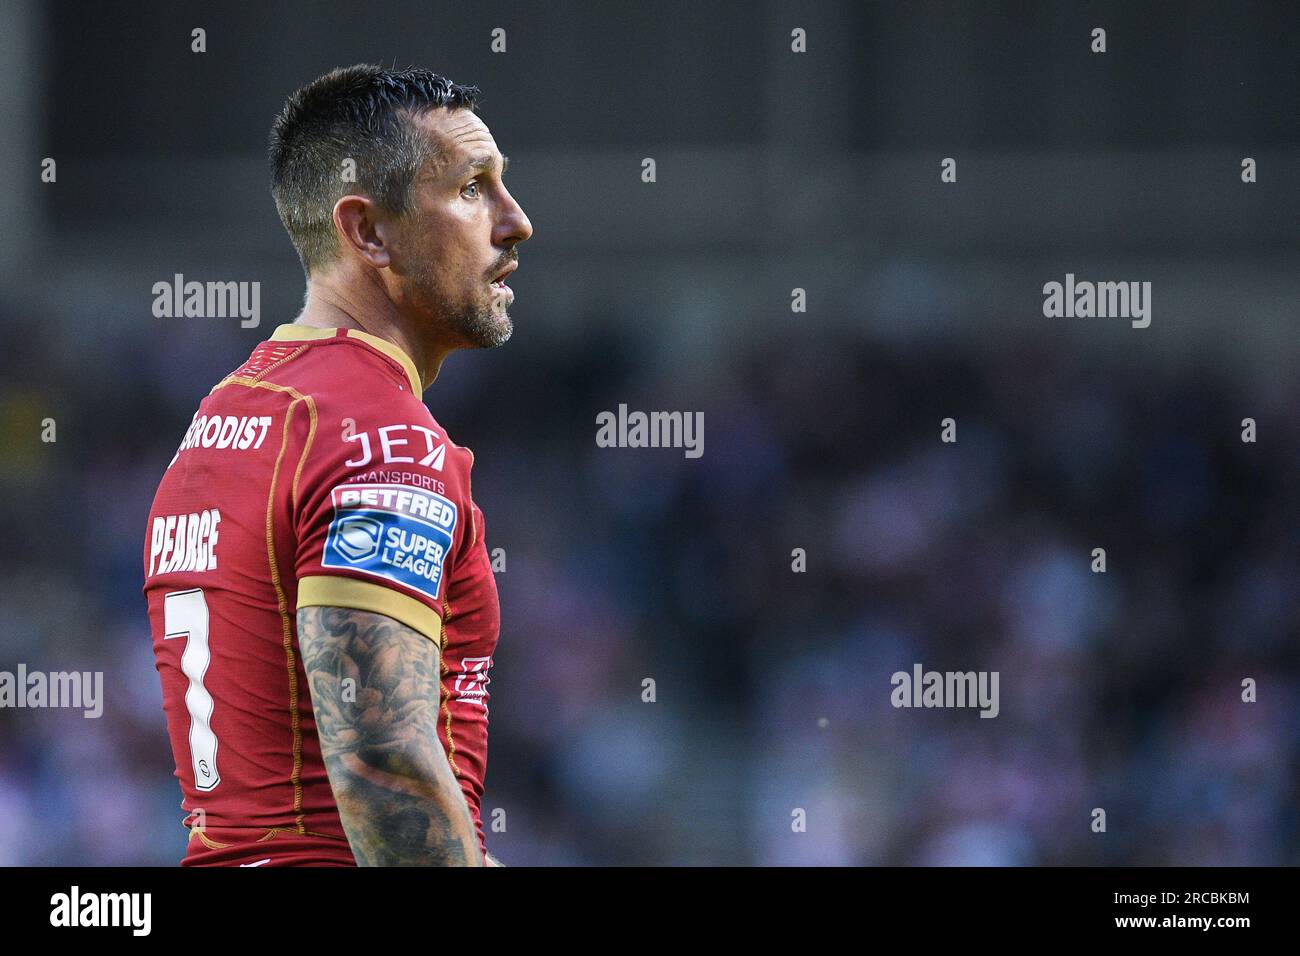 St. Helens, Angleterre - 13 juillet 2023 - Mitchell Pearce de Catalan Dragons donne des instructions. Betfred Super League, St. Helens vs Catalan Dragons au Totally Wicked Stadium, St. Helens, Royaume-Uni Banque D'Images